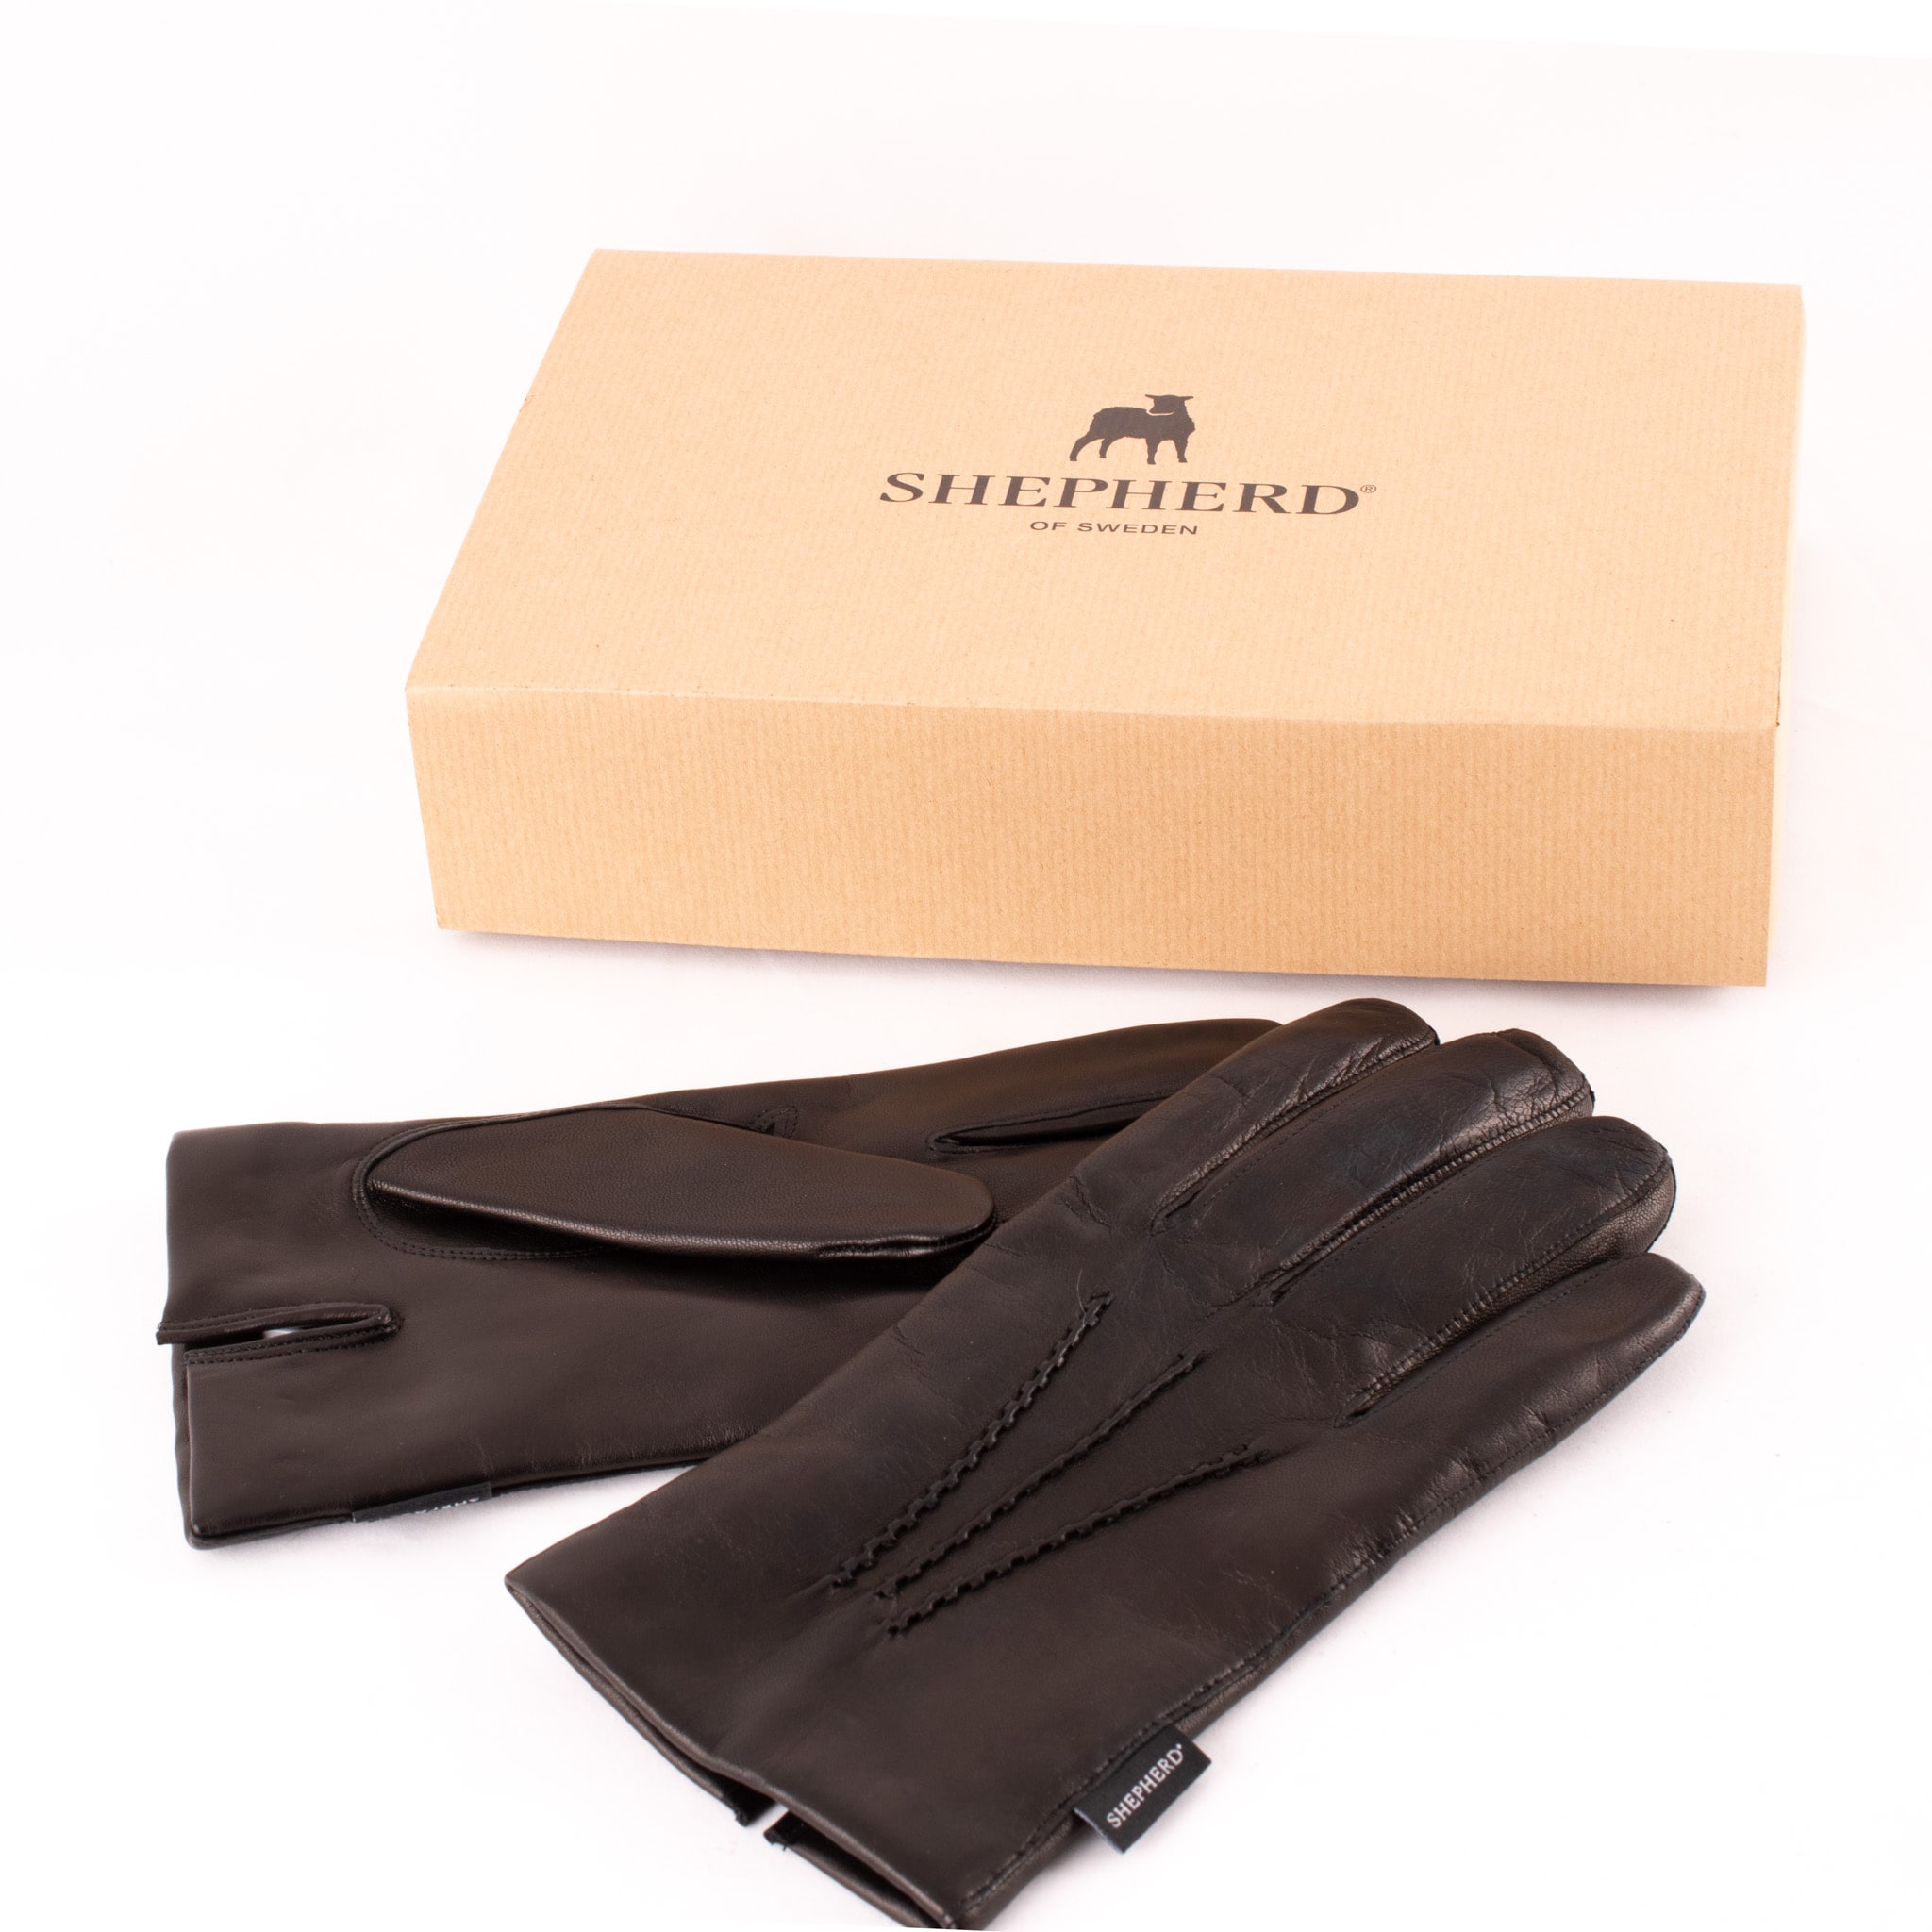 Shepherd leather glove lined with wool